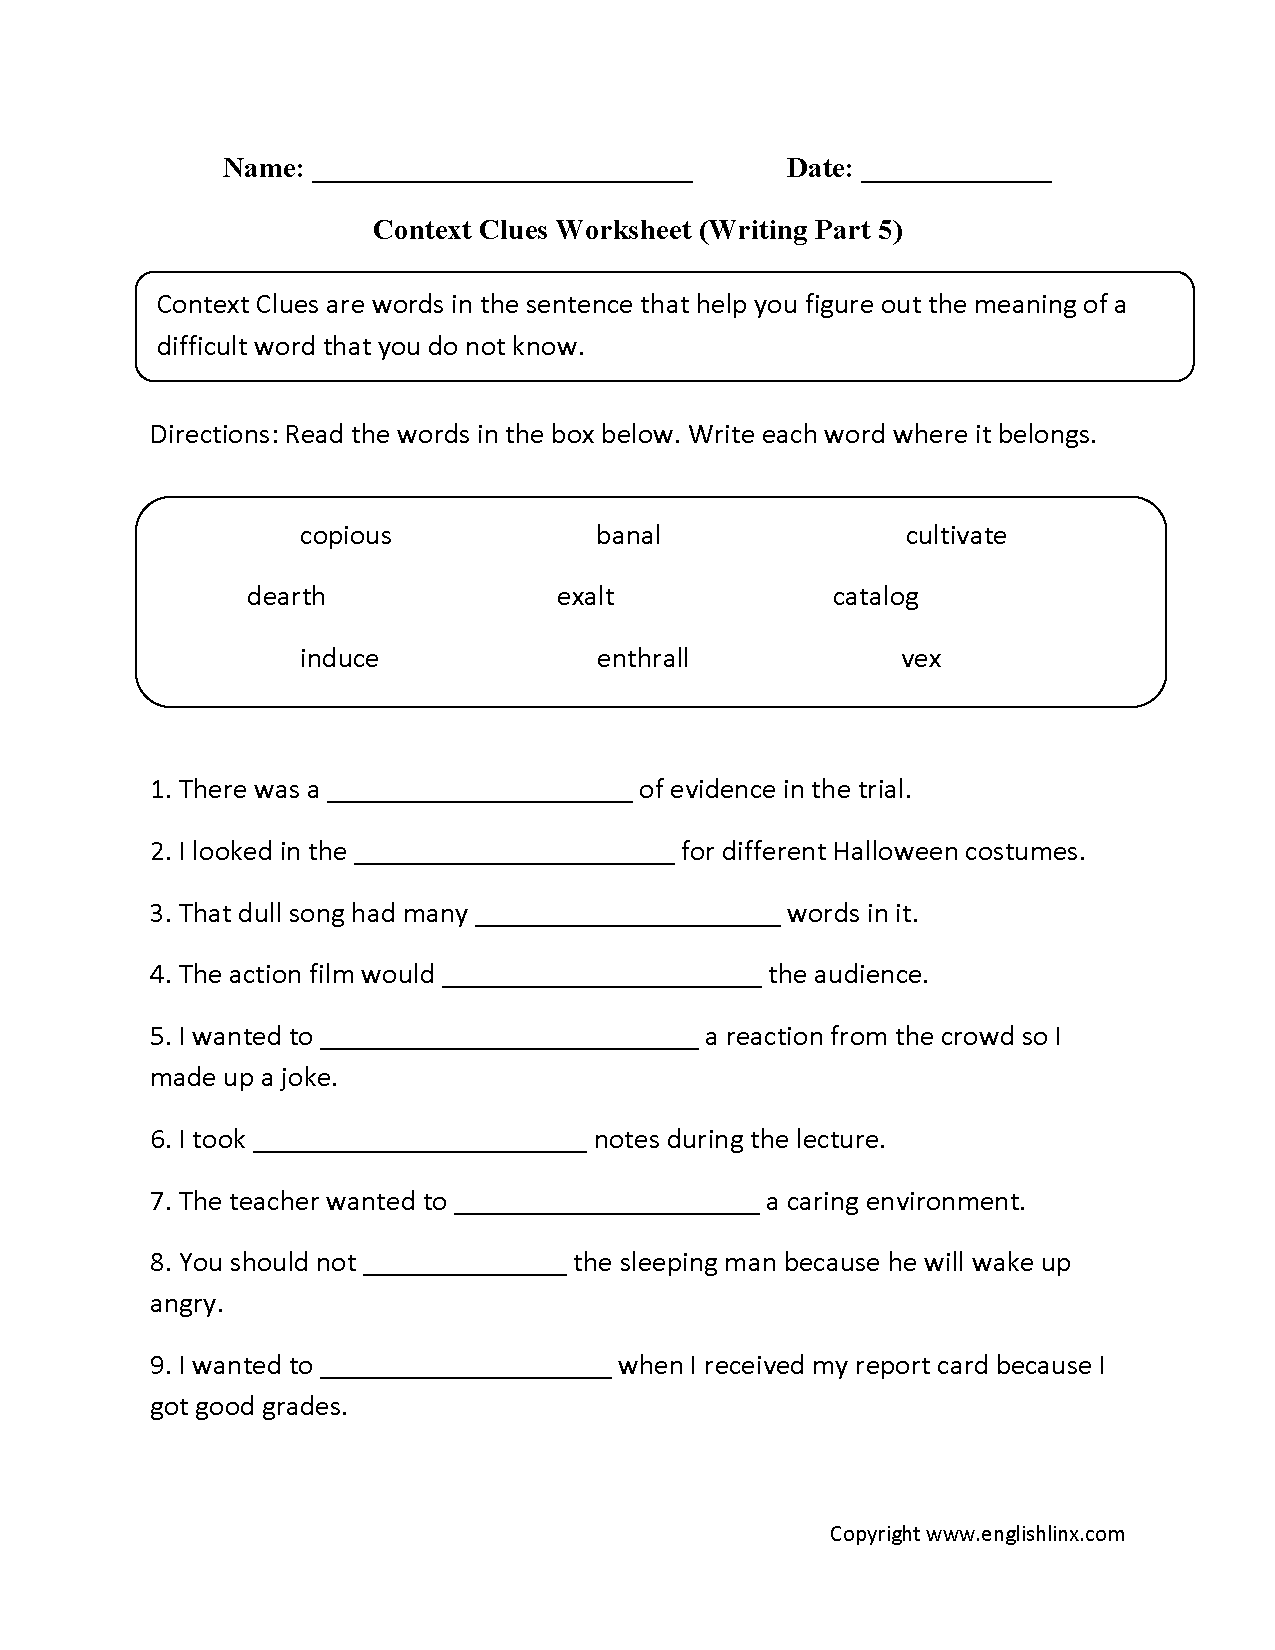 Context Clues Worksheets With Answers Grade 4 Goimages Quack